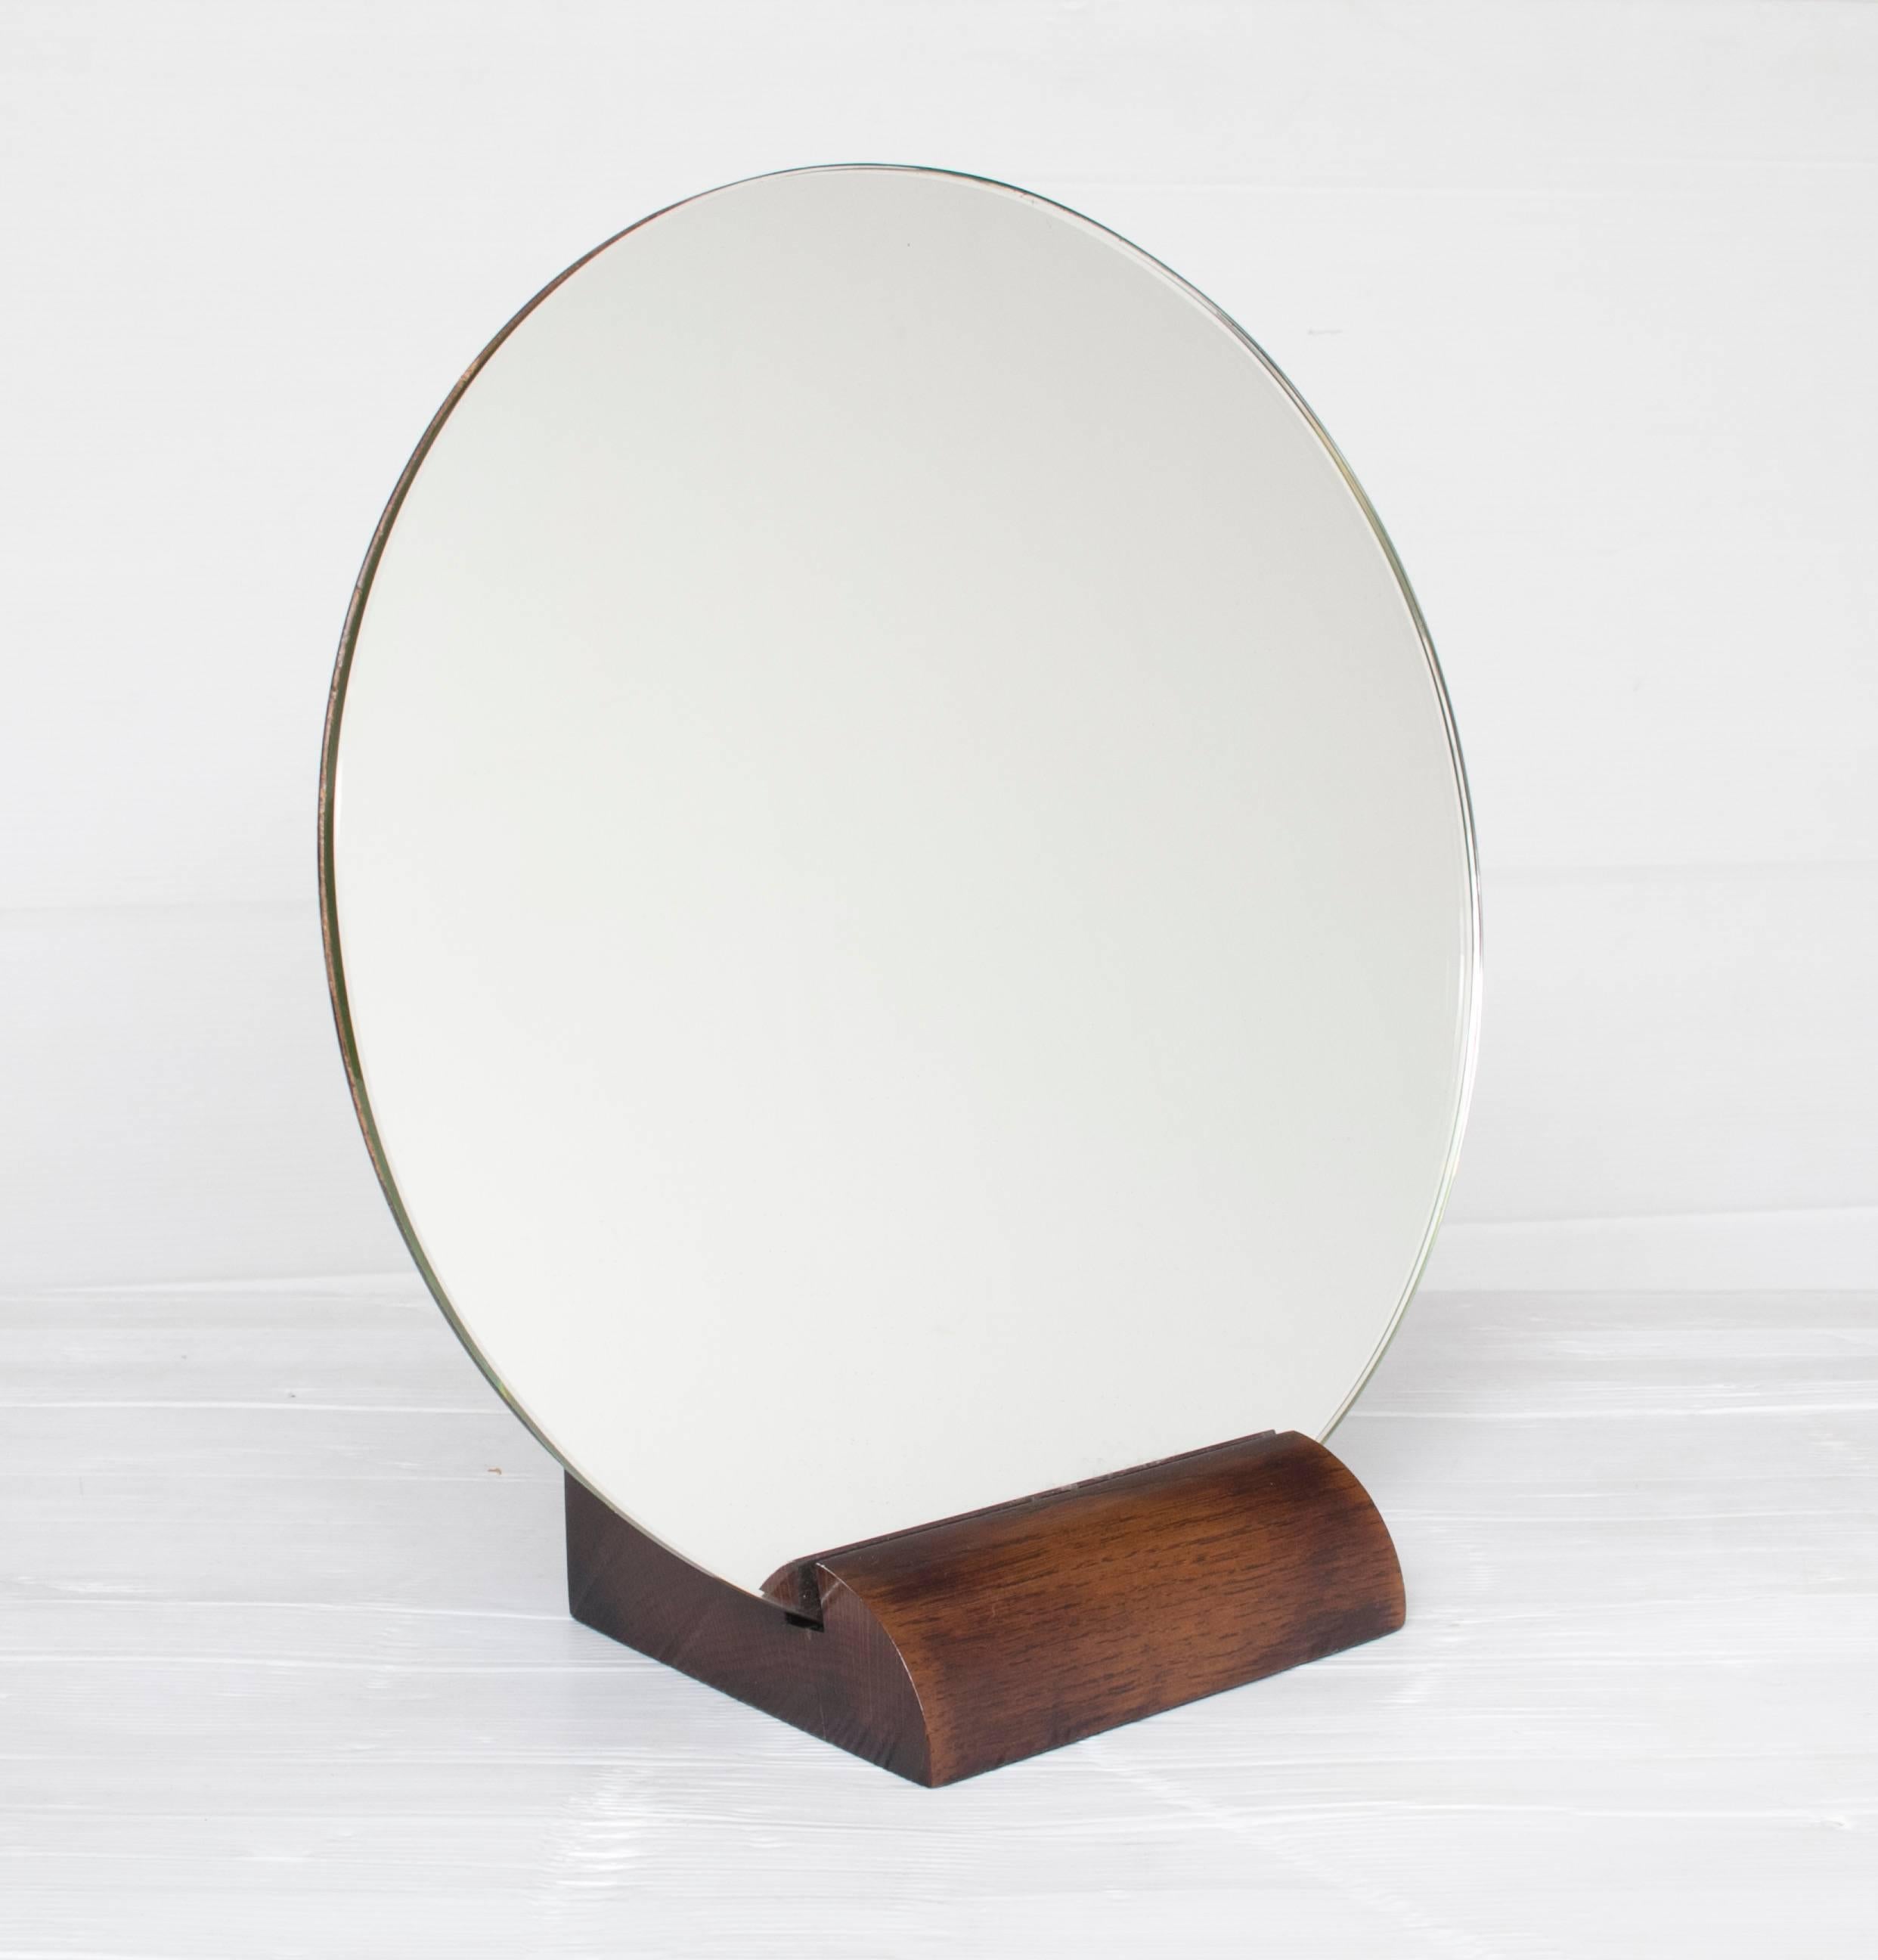 Art Deco French mirror.
The finest Art Deco mirror attributed to Emile-Jacques Rhulmann
Circular mirror set in solid walnut, walnut backed with a curve to the edge, giving the appearance of a floating mirror.
This early example dates from circa 1920